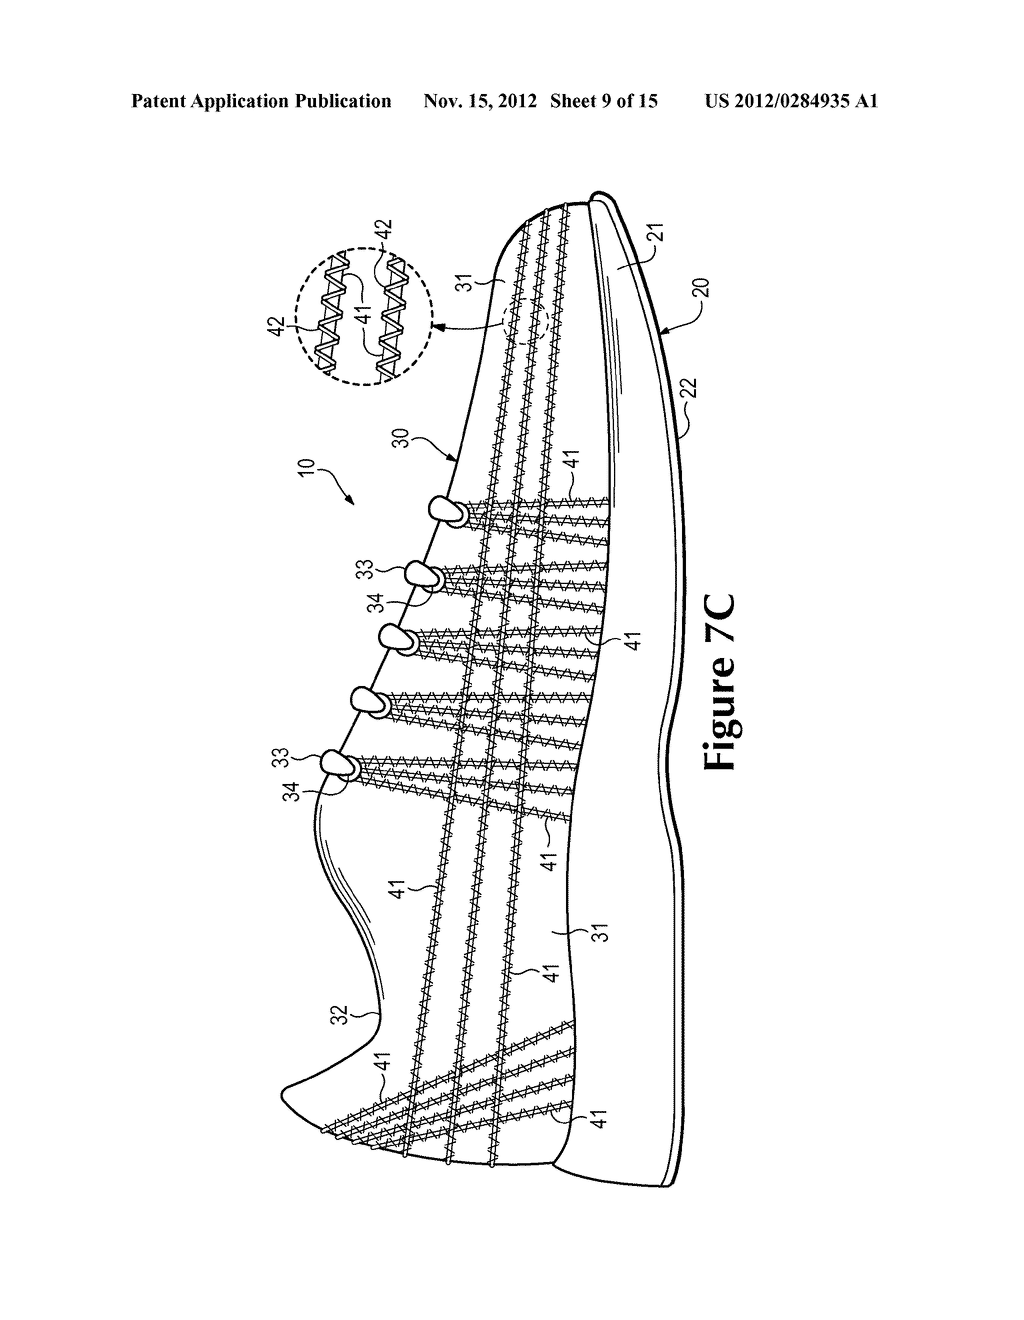 Article Of Footwear Incorporating Tensile Strands And Securing Strands - diagram, schematic, and image 10